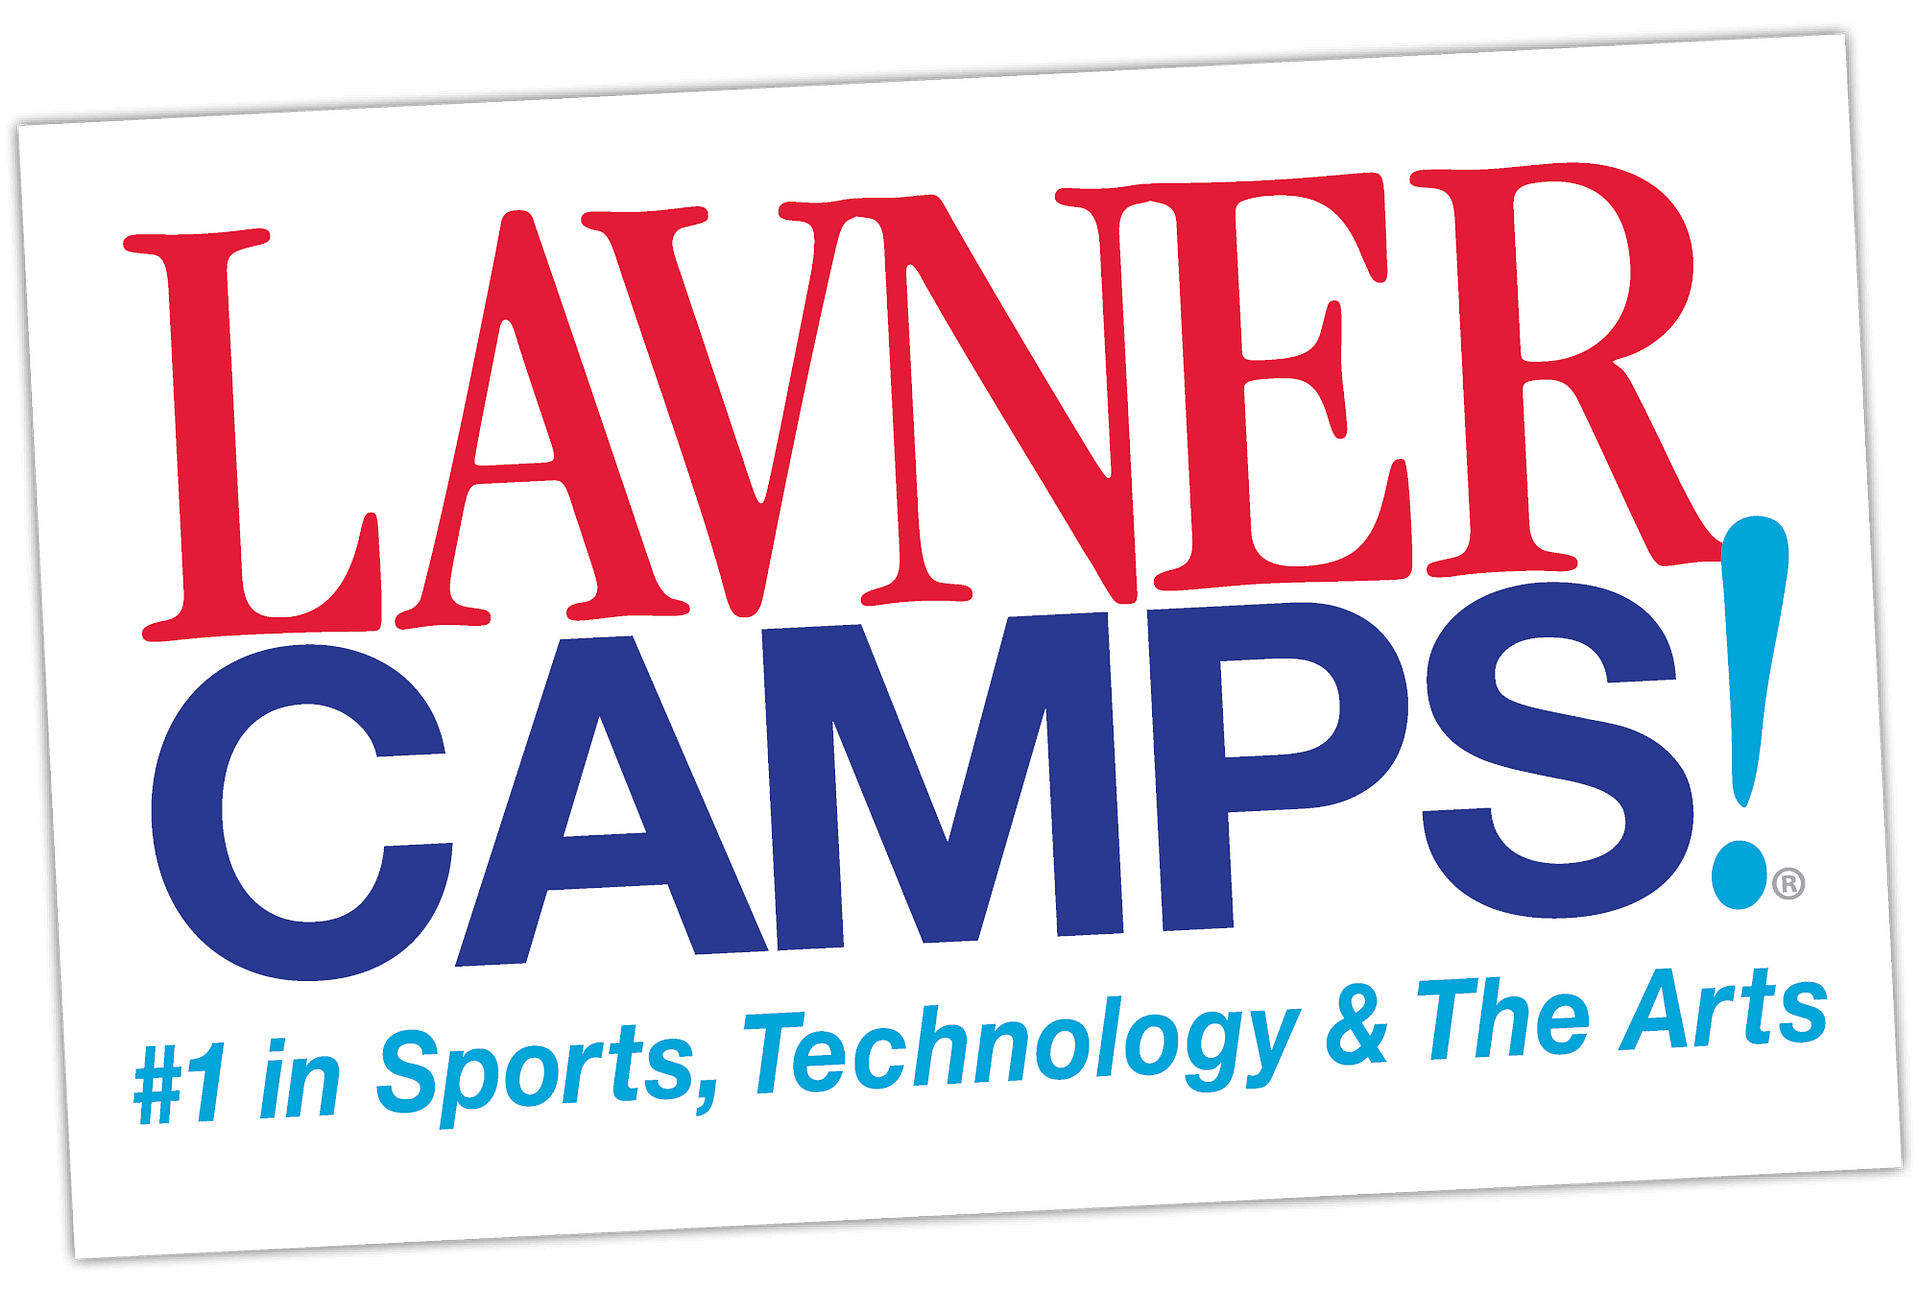 Philadelphia Summer Camps At Penn Lavner Camps 2021 Tech Camps - show me how to rech the end in roblox camp